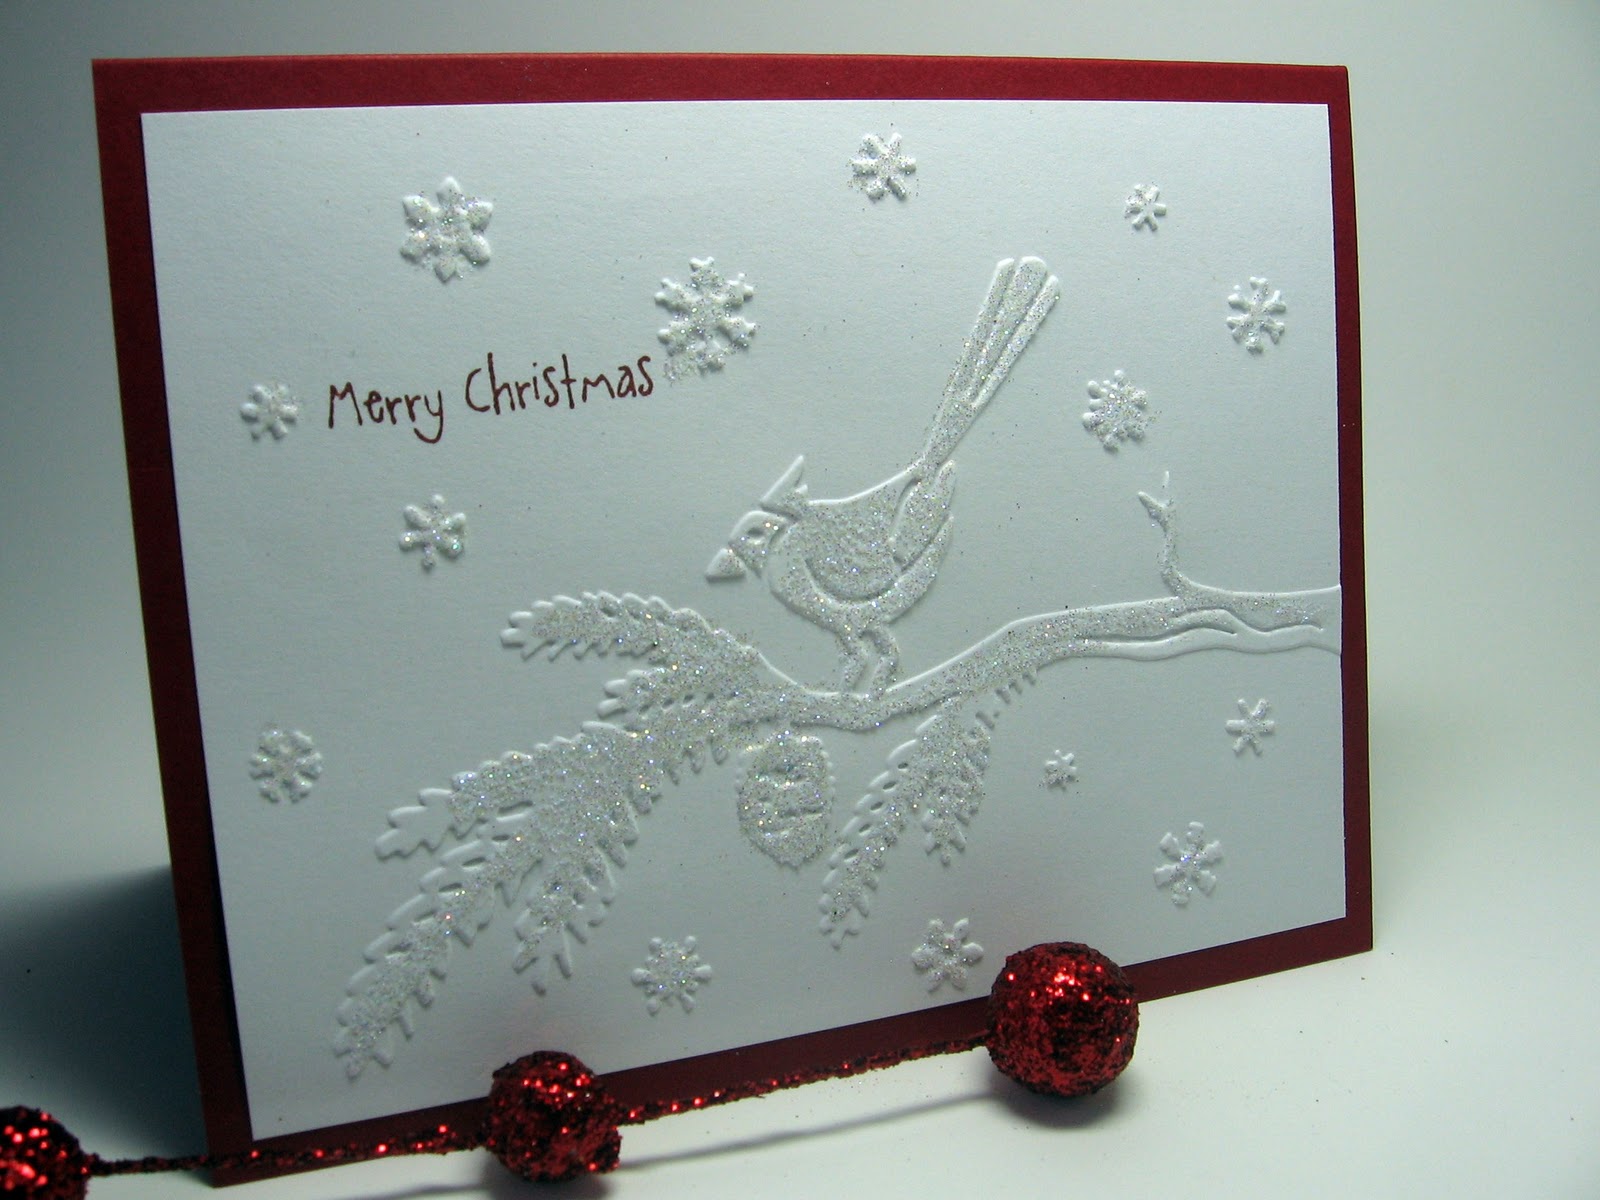 stamping up north: Embossed Christmas cards